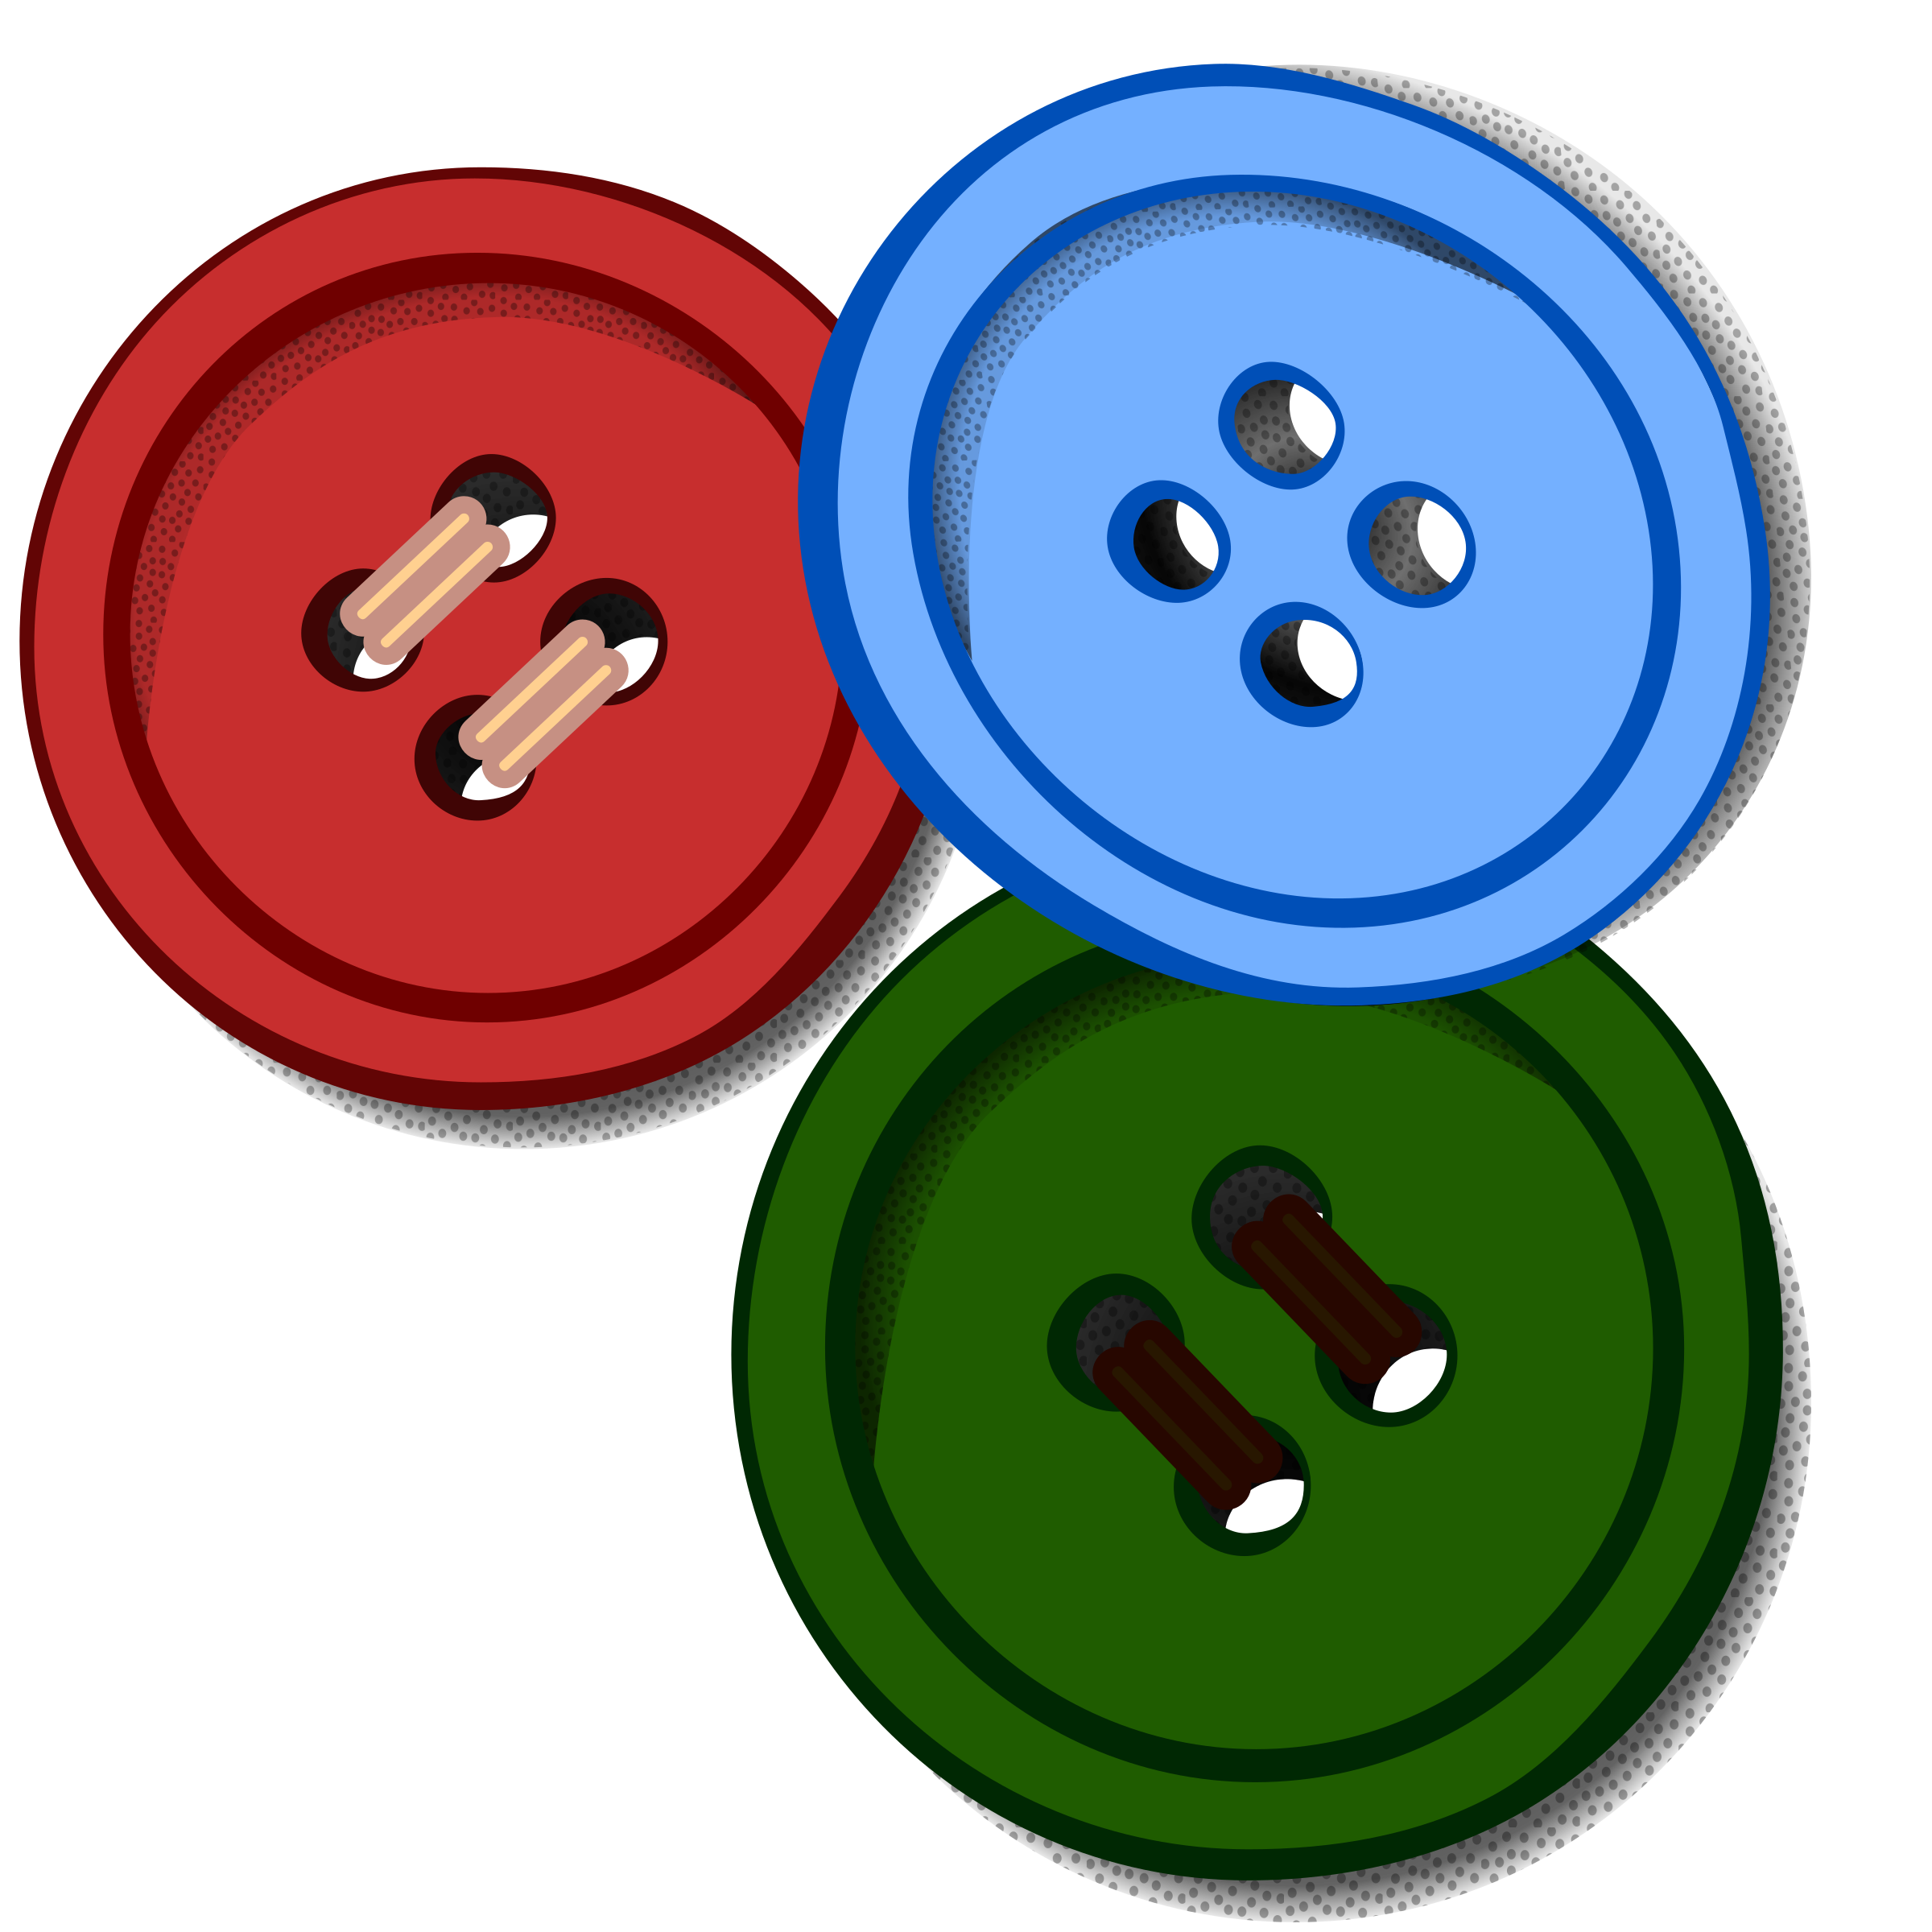 Download Colored Buttons vector files image - Free stock photo ...